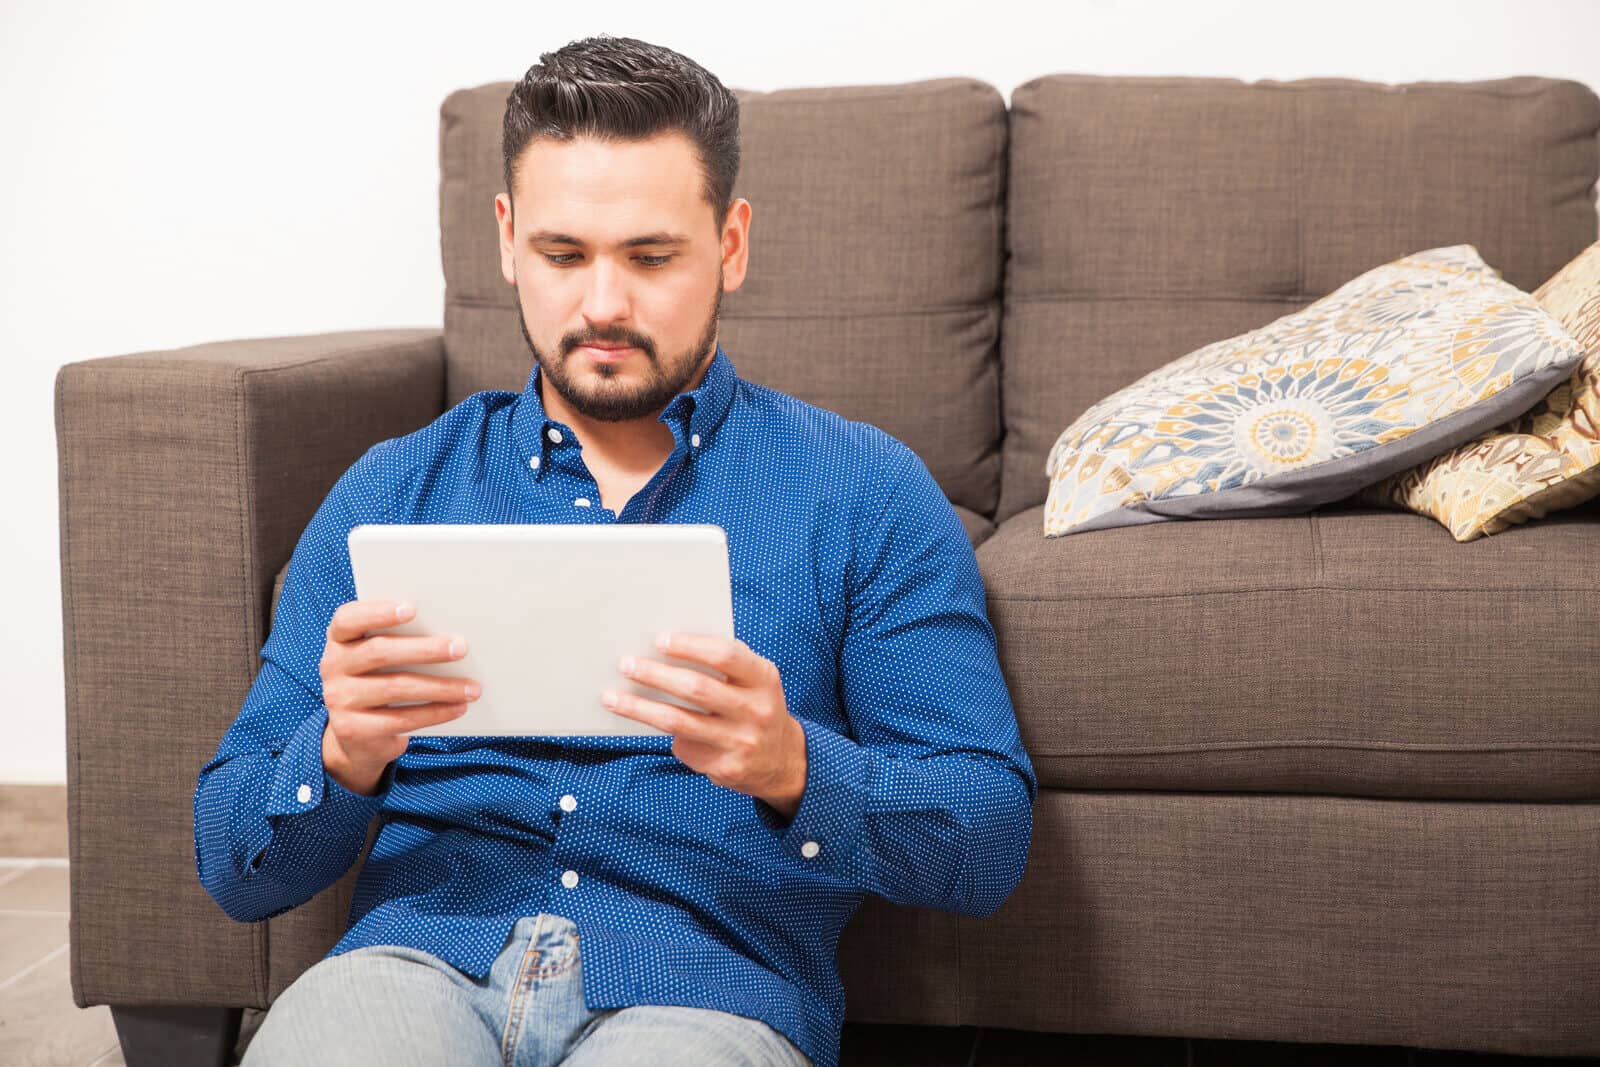 Man Sitting in Front of Couch Looking at Tablet